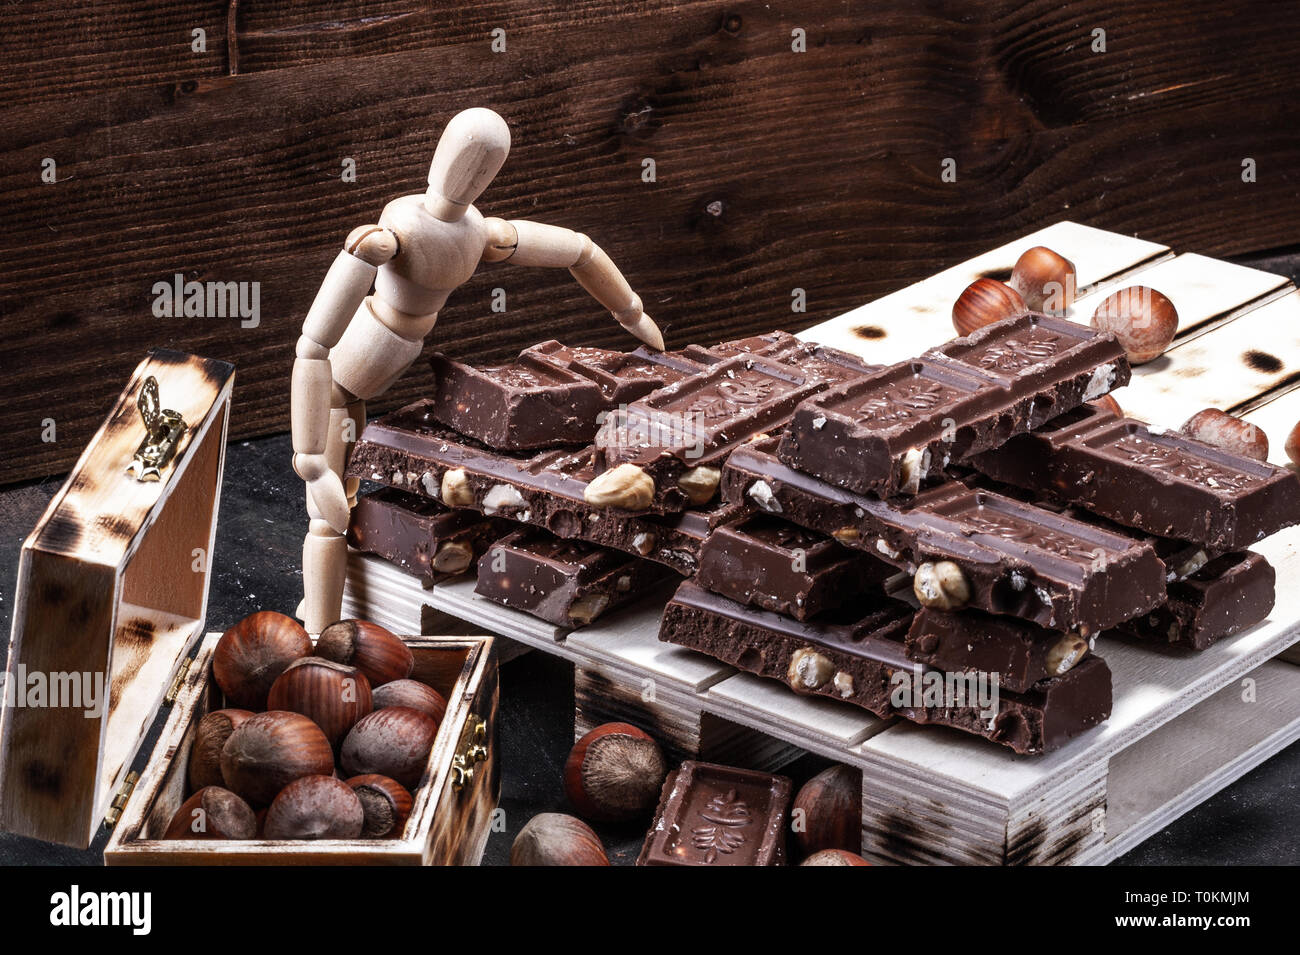 Large amounts of milk chocolate in piles on boards. Hazelnuts in a crate. Stock Photo